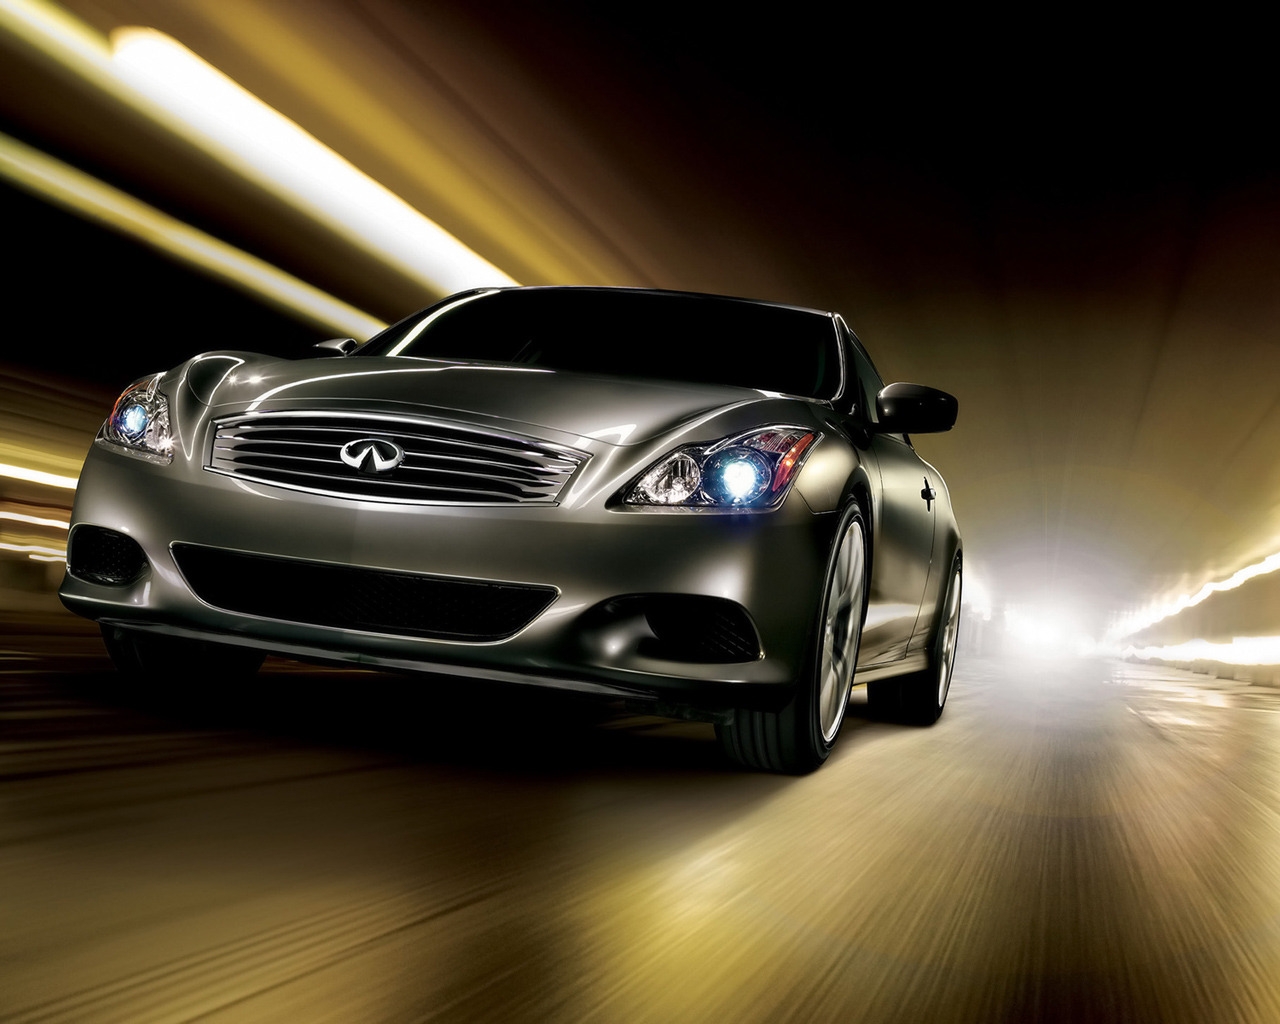 Infiniti G37 Coupe for 1280 x 1024 resolution